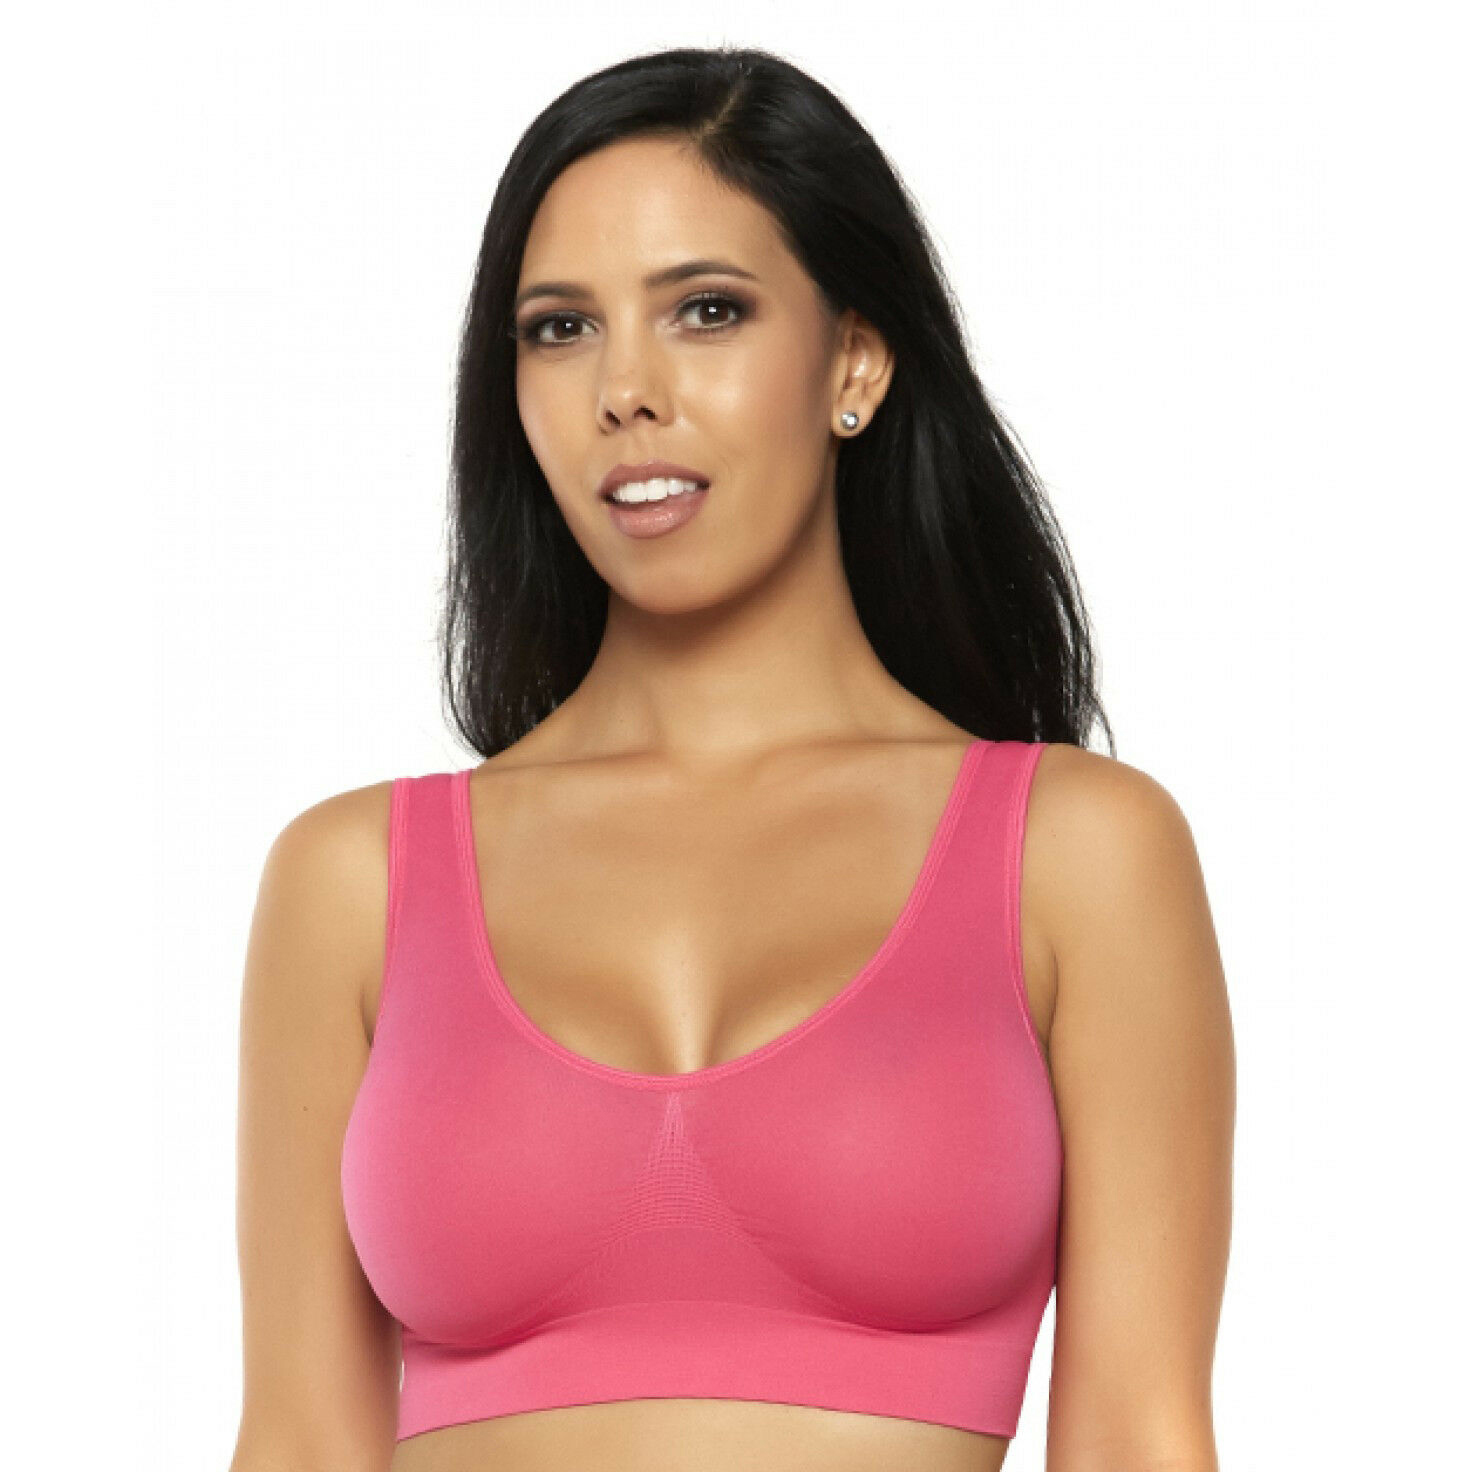 Buy PINK MEDIUM-SUPPORT SPORTS BRA for Women Online in India